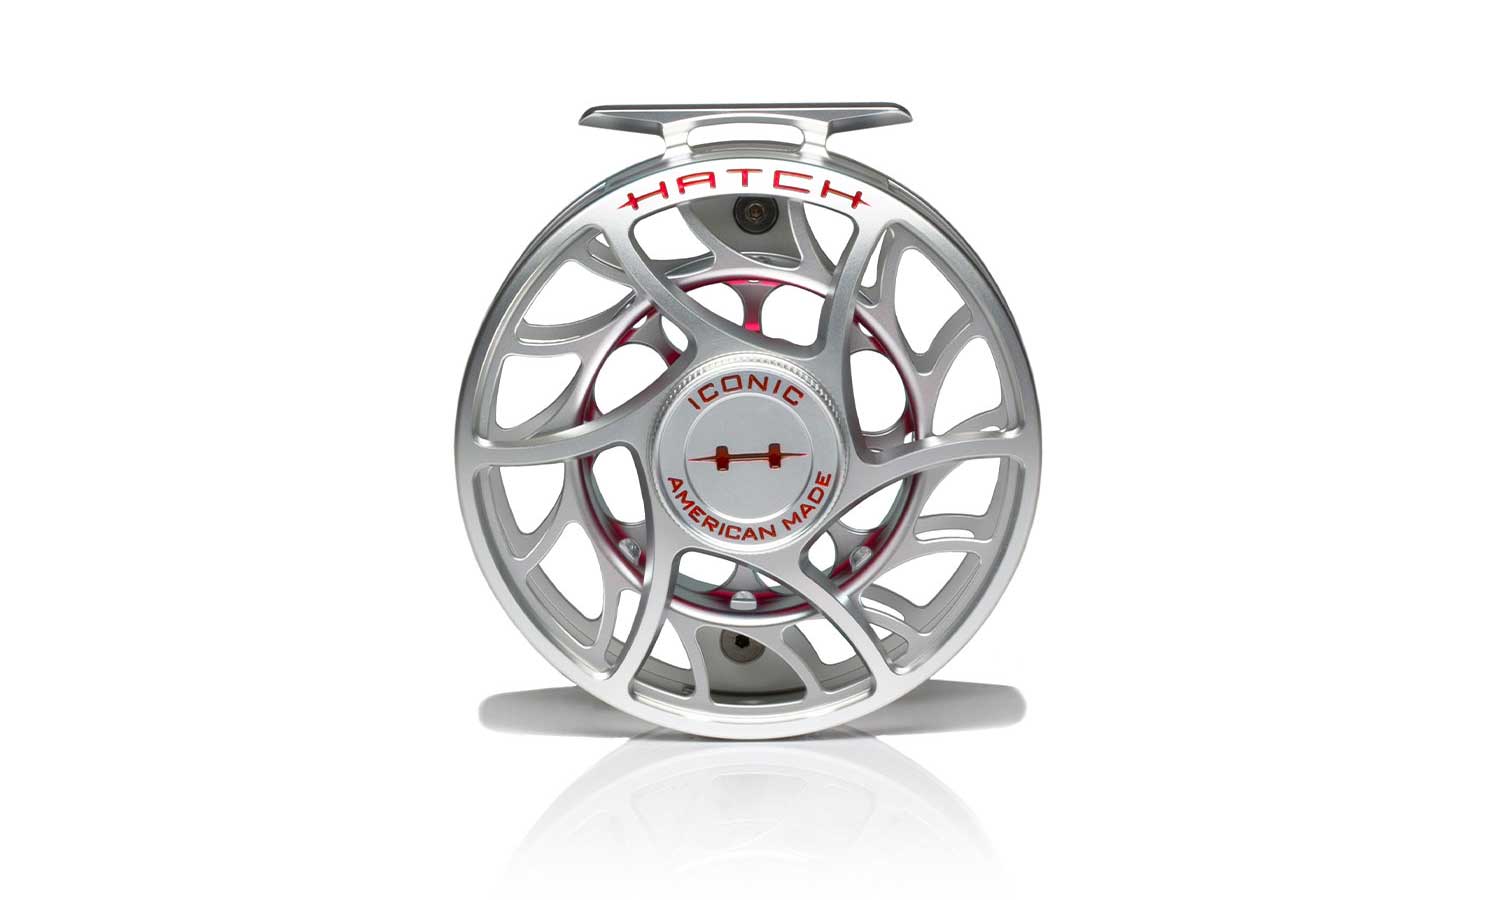 Hatch Iconic Fly Reel // 9 Plus